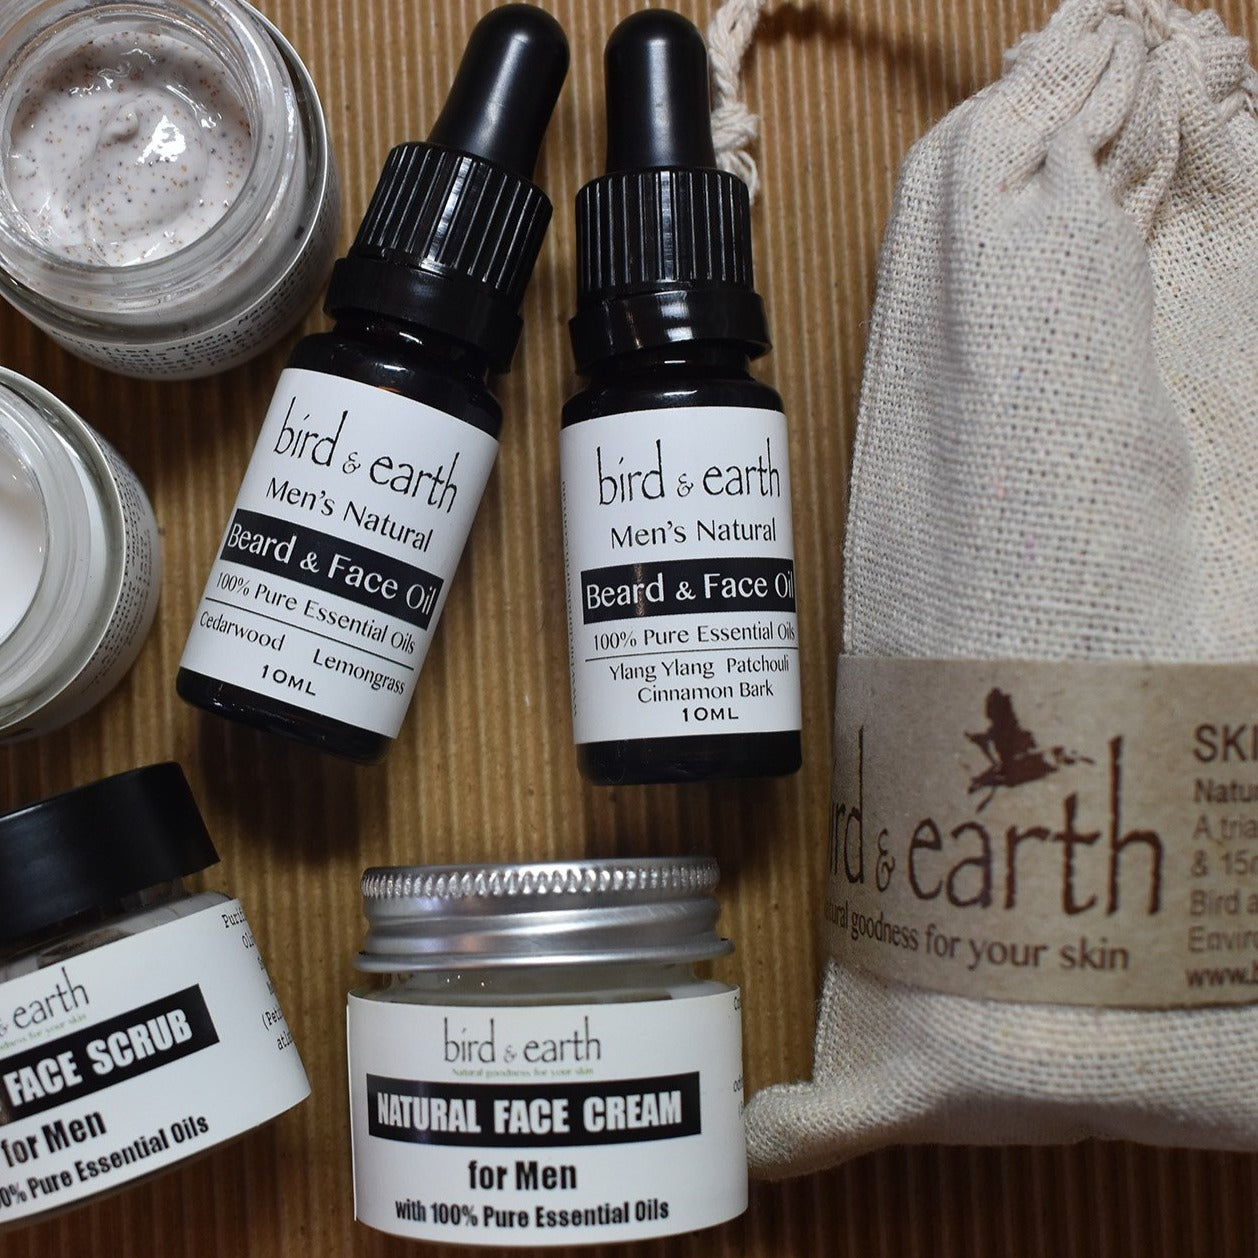 Women and Men skincare travel/pamper packs Offer - Bird and Earth